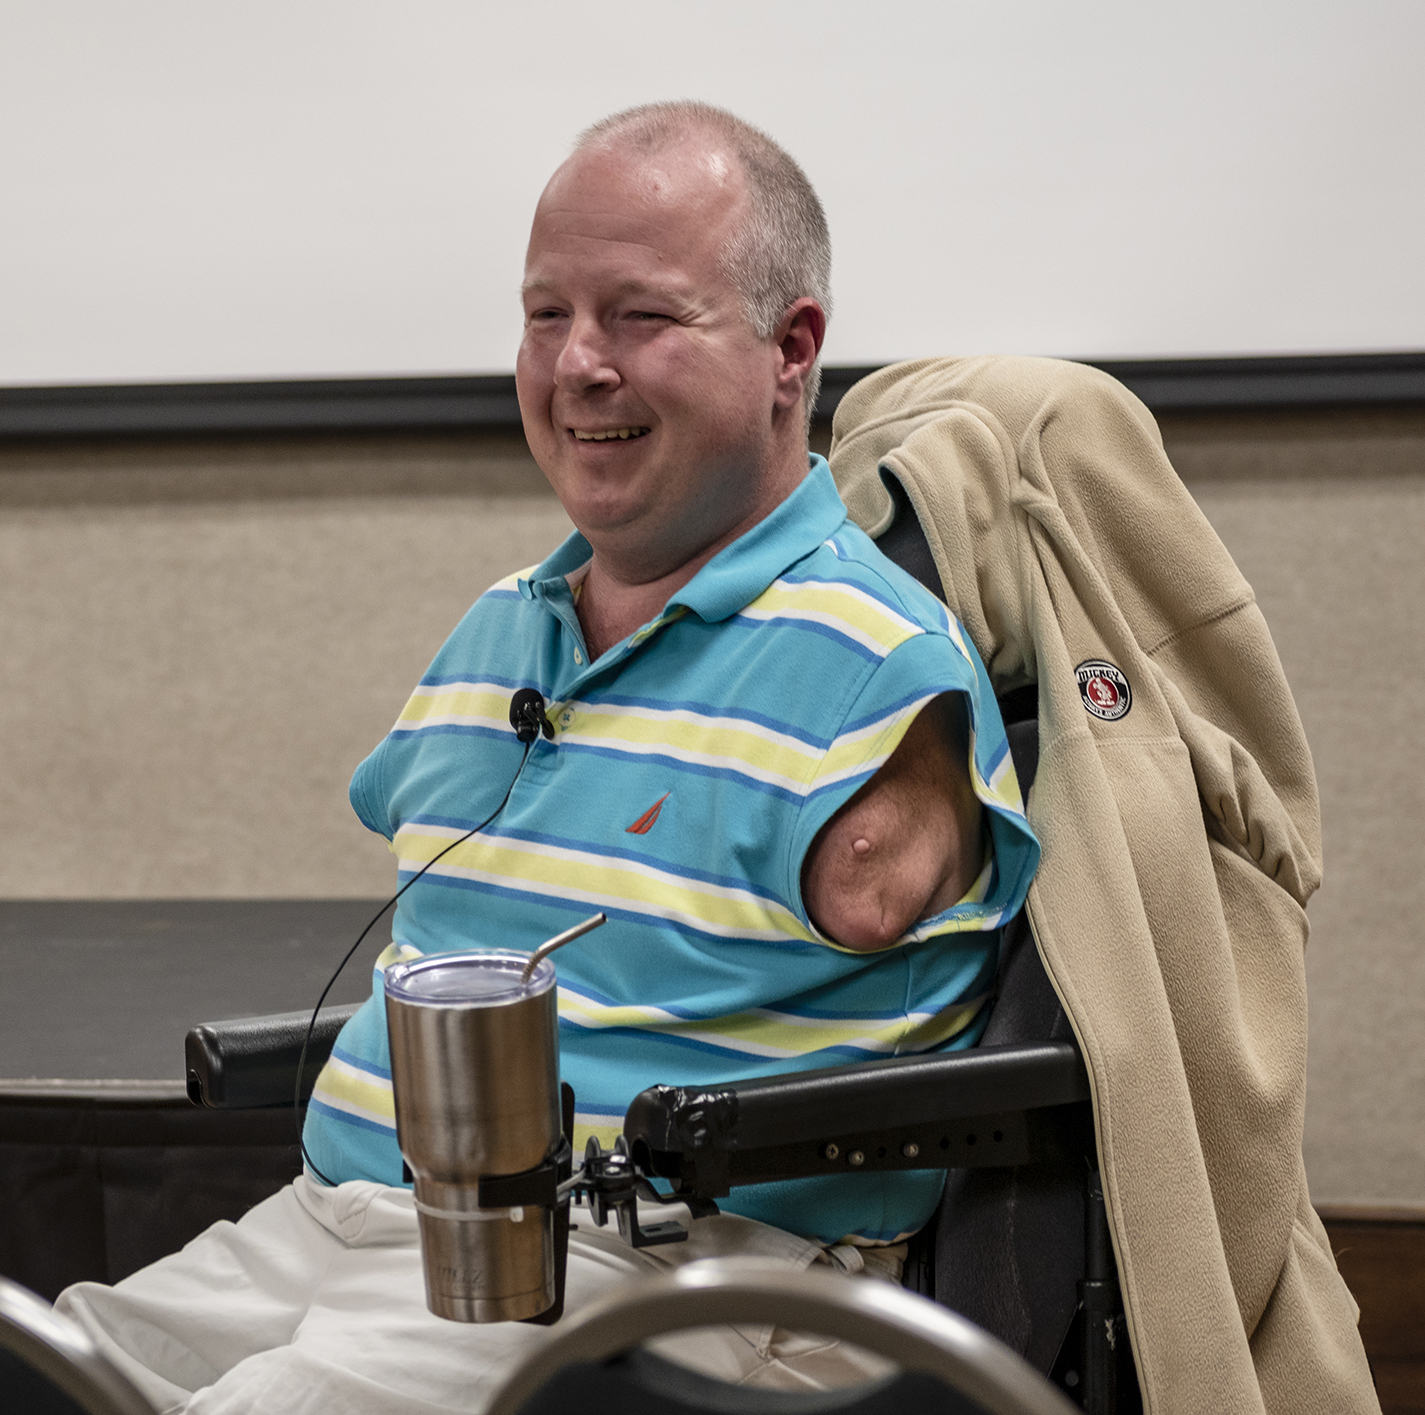 Former TCC student and motivational speaker Chet McDoniel shares how he’s overcome the many challenges he’s faced throughout his life during an event Oct. 16 on NE.